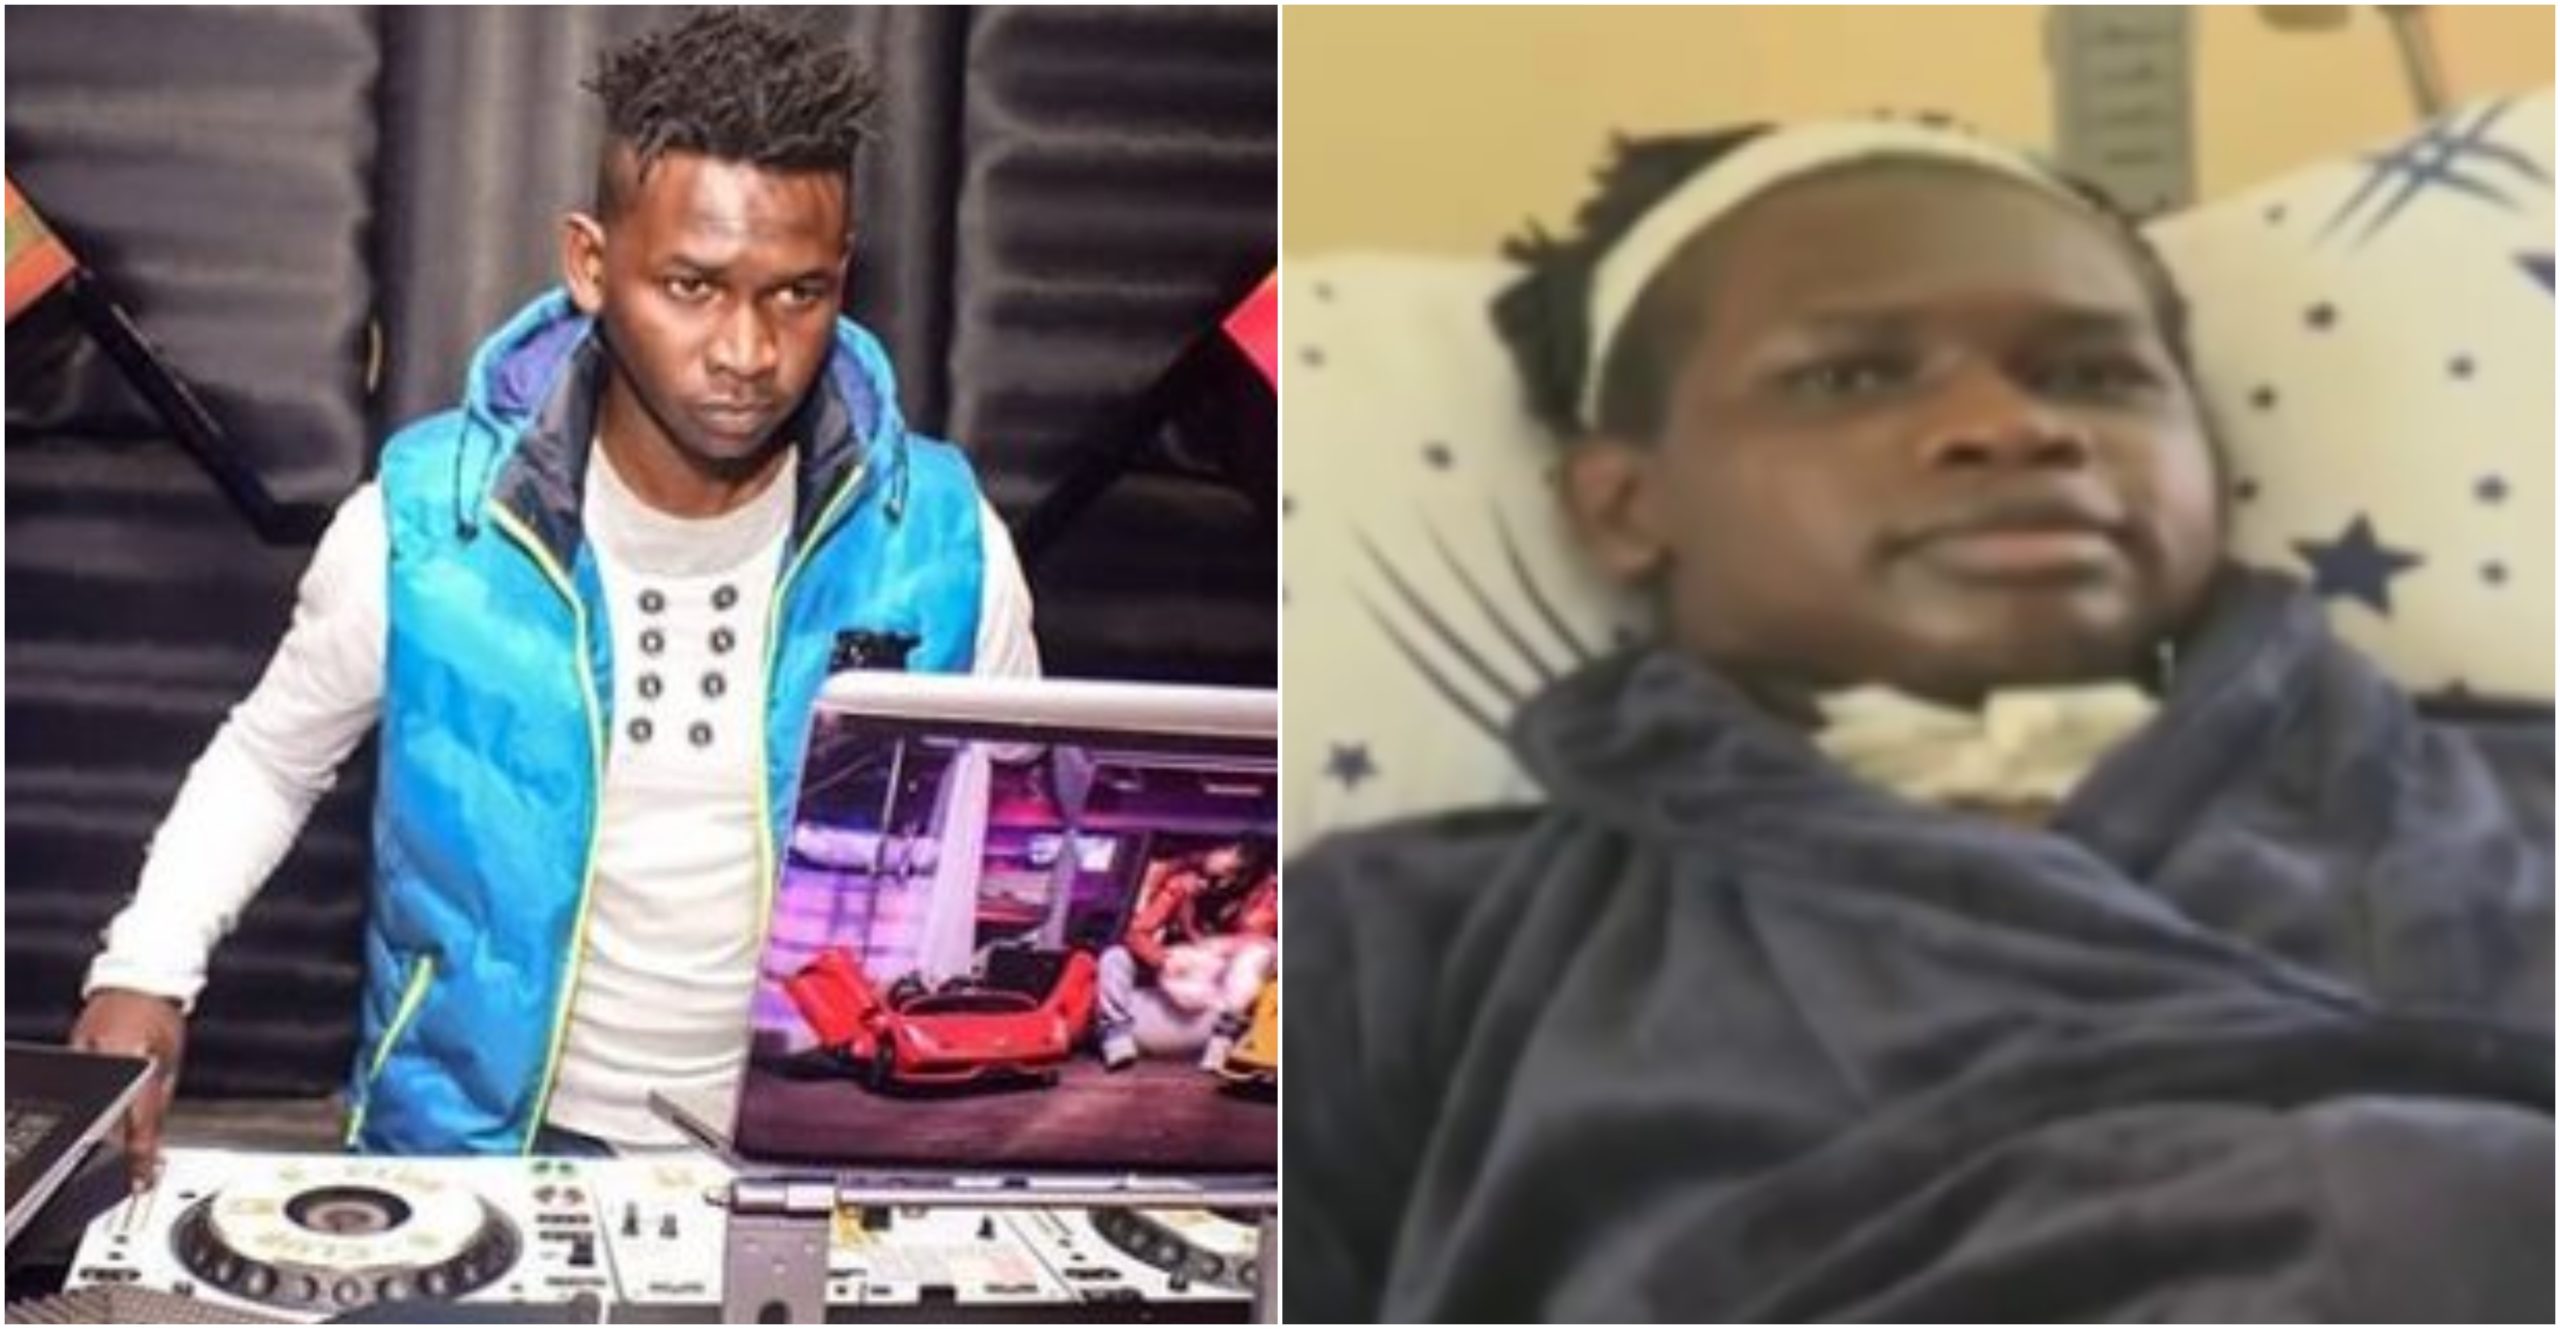 “My hands were my tools of trade but I now can’t move them,” paralyzed DJ Evolve cries for justice (Video)